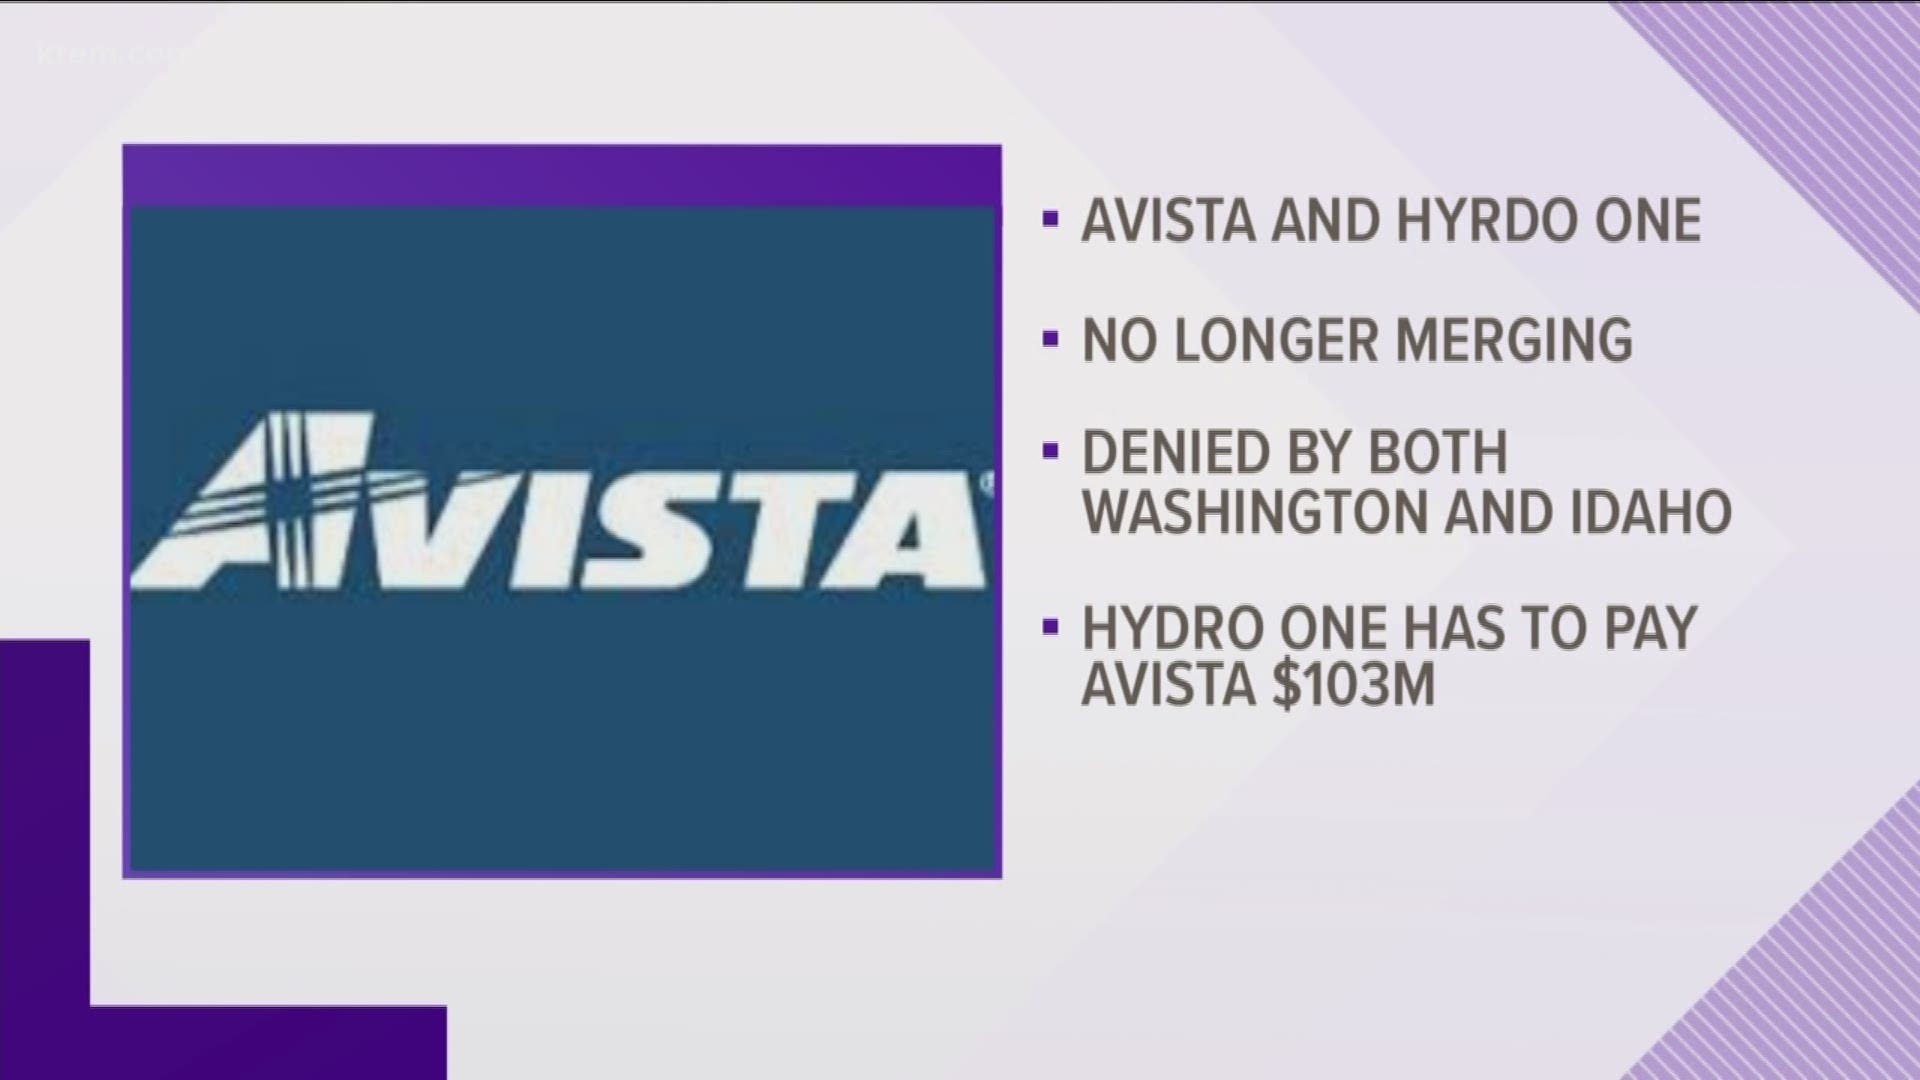 Officials said Hydro One will pay Avista $103 million termination fee as a result of the decision.